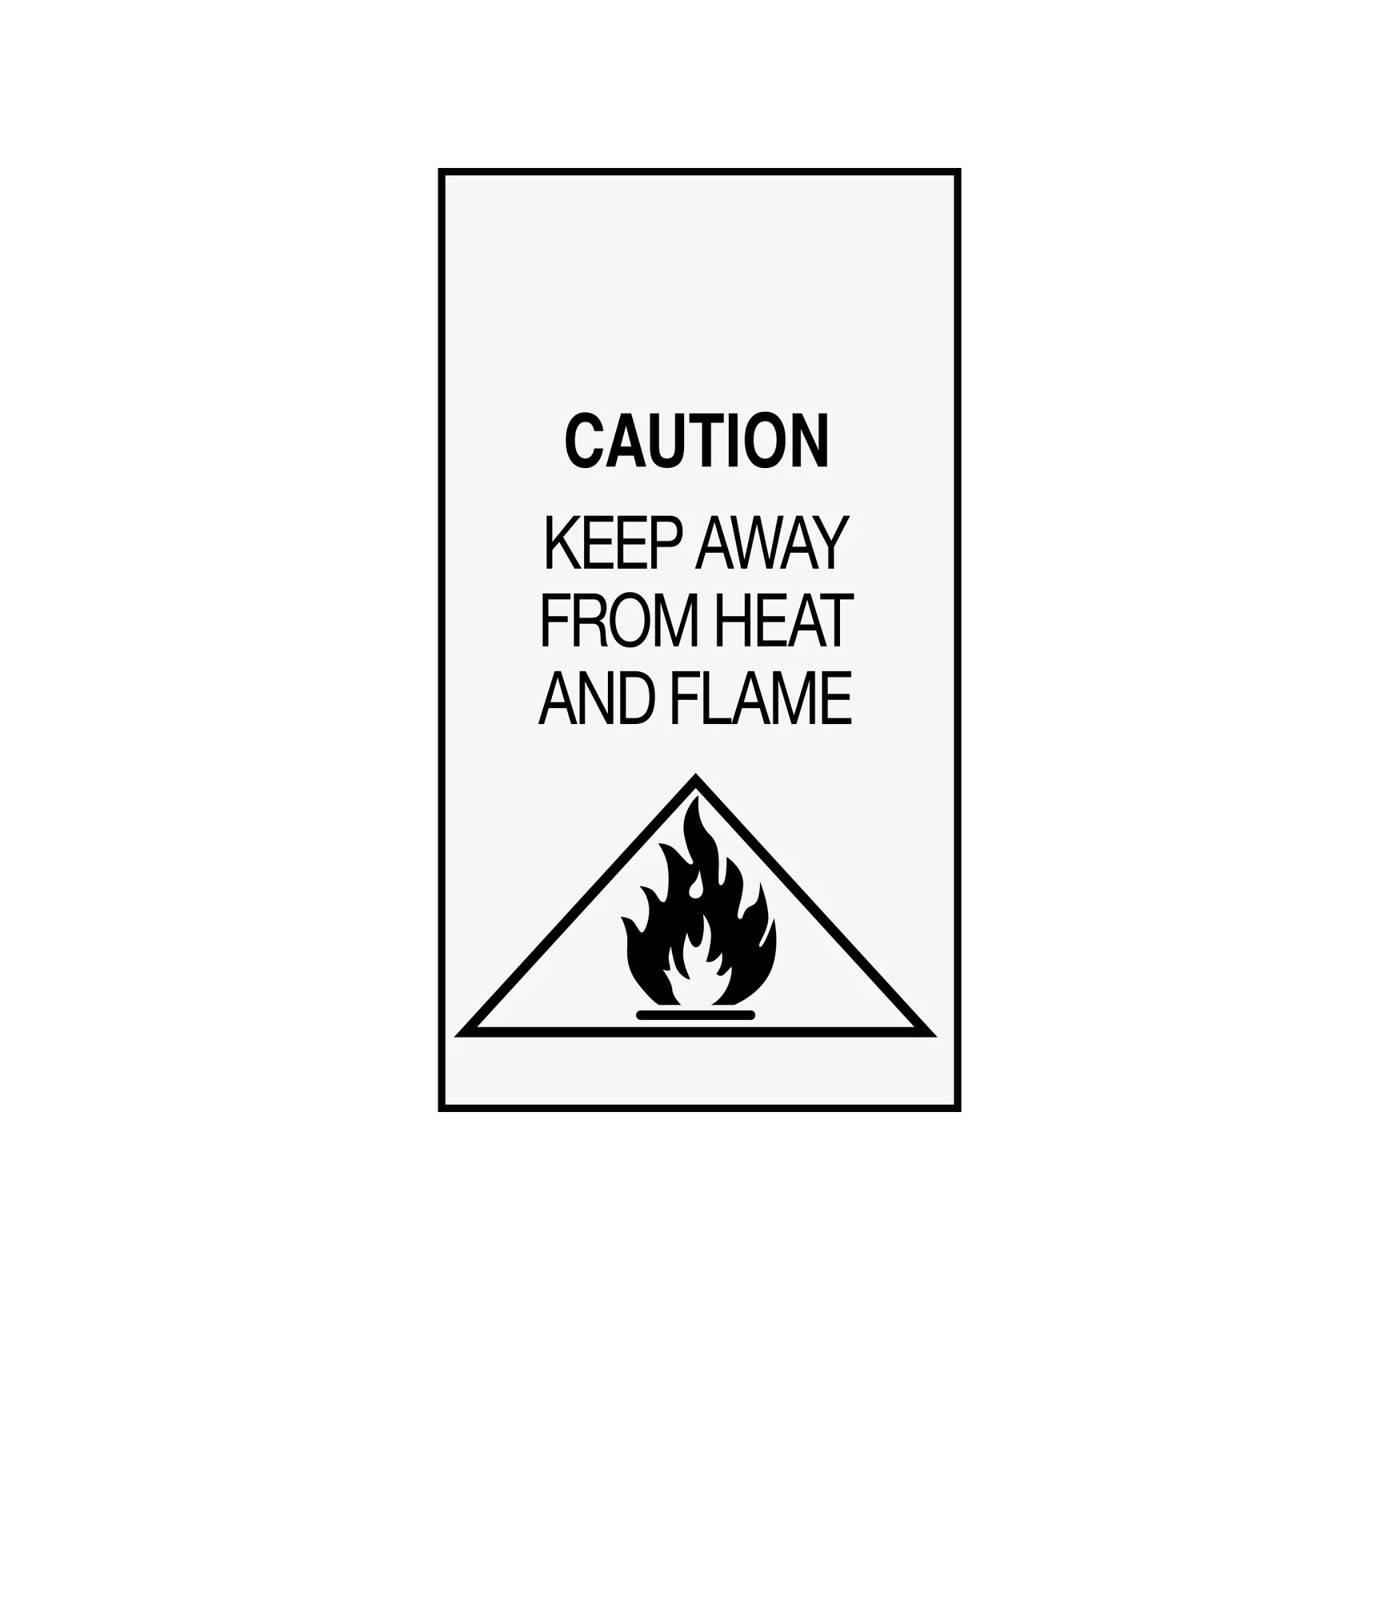 64819631-IMG-fire caution label - category 1,2+3